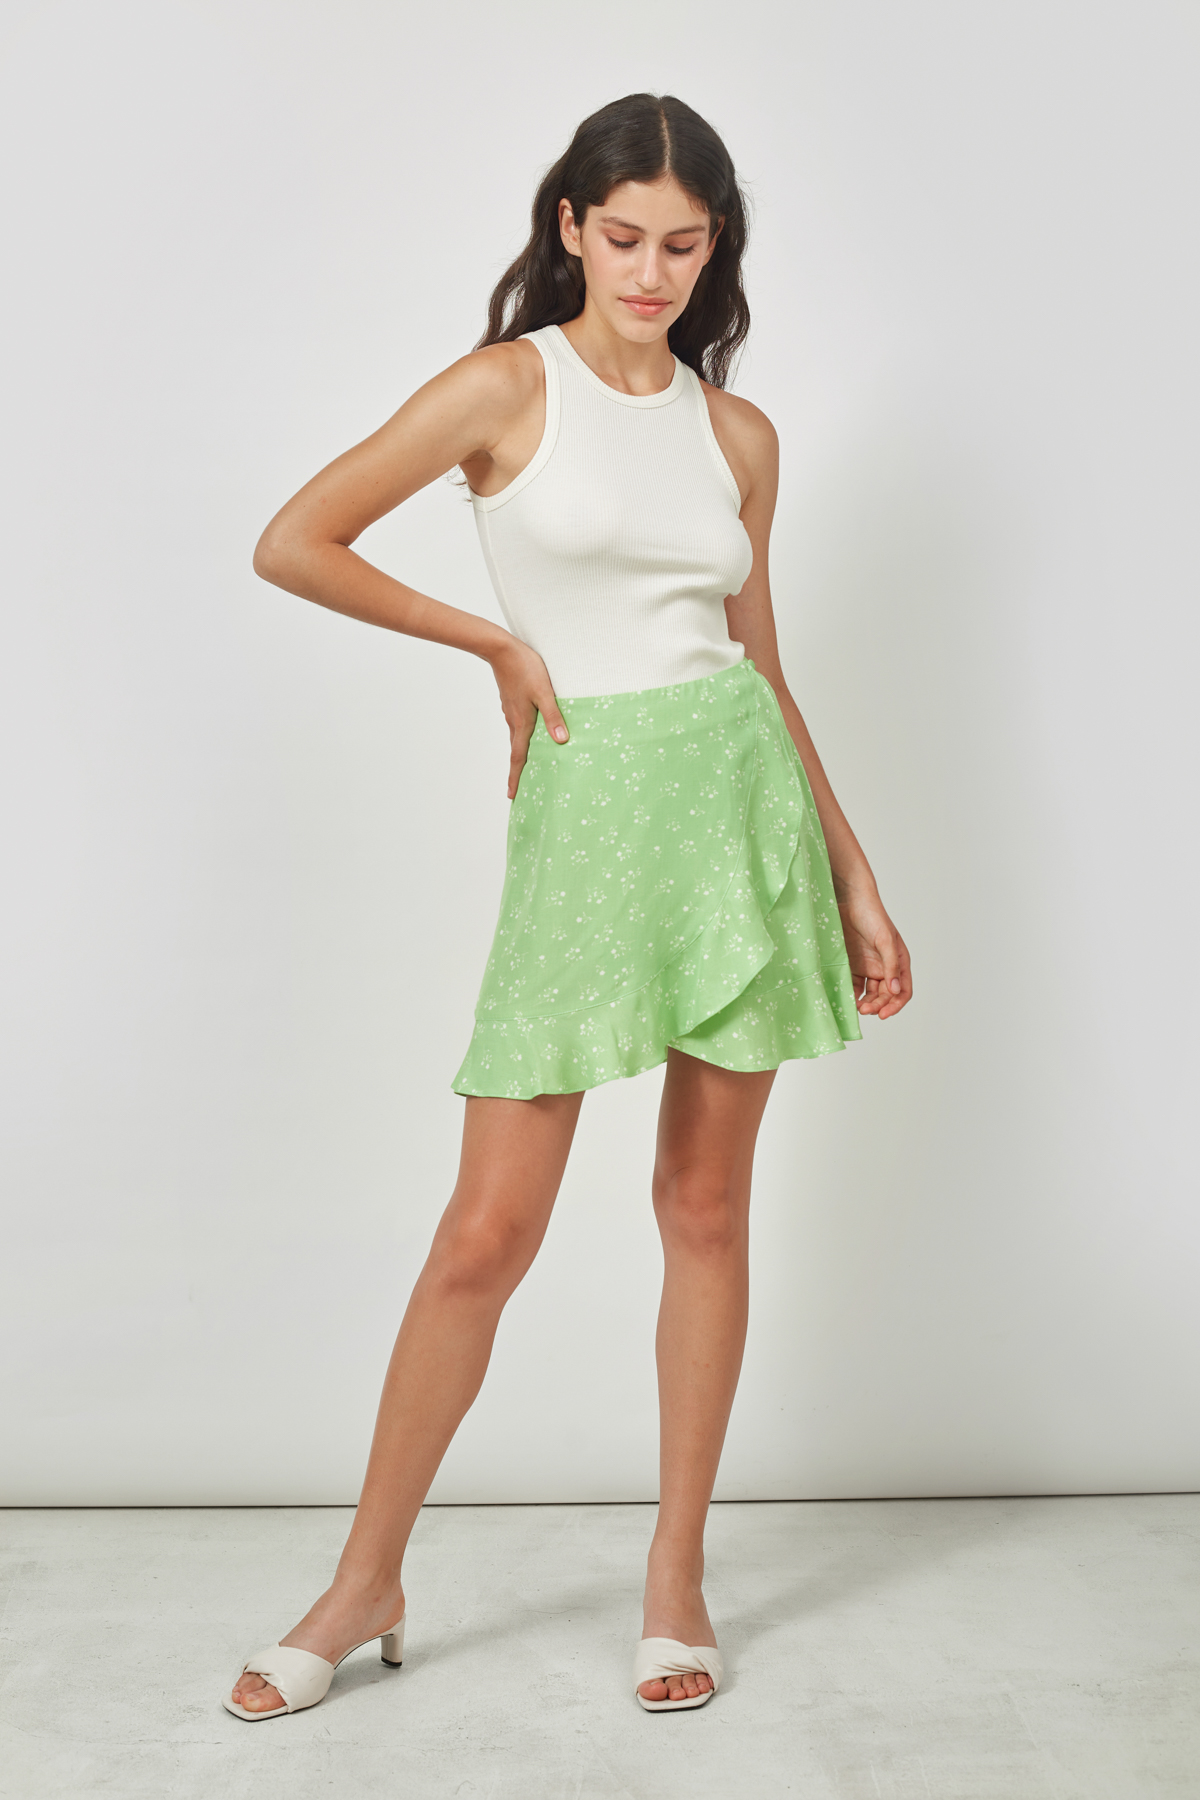 Short skirt in mint viscose in floral print, photo 2